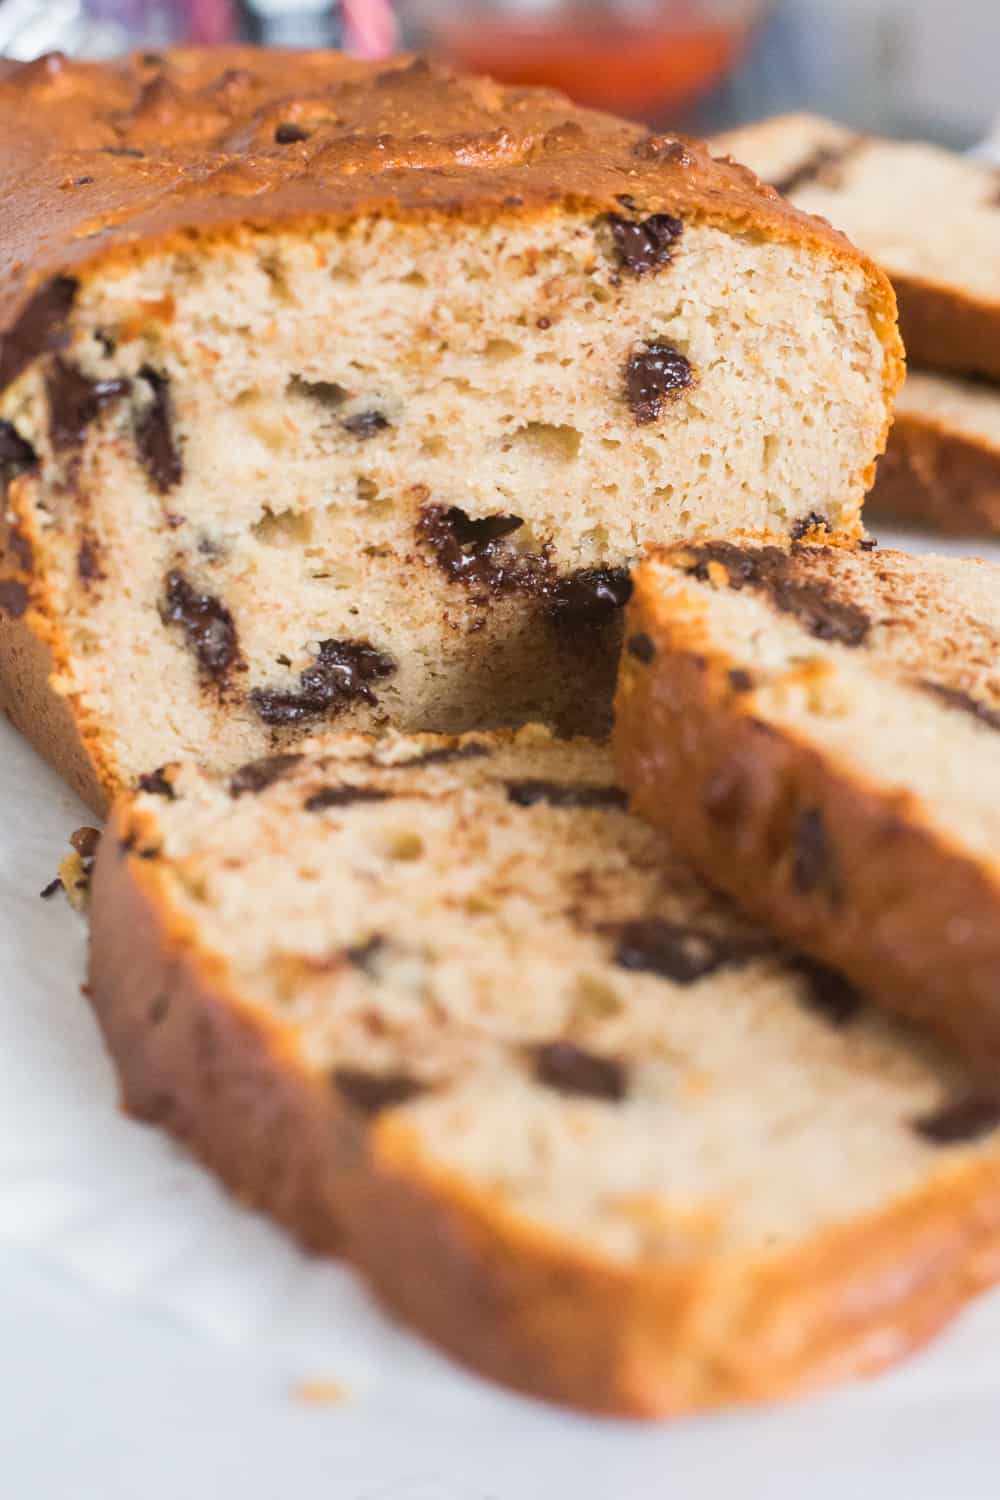 keto chocolate chip bread, low carb chocolate chip bread, keto chocolate chip bread recipe, low carb chocolate chip bread recipe, chocolate chip bread keto, easy chocolate chip bread recipe, sugar free chocolate chip bread, sugar free chocolate bread,